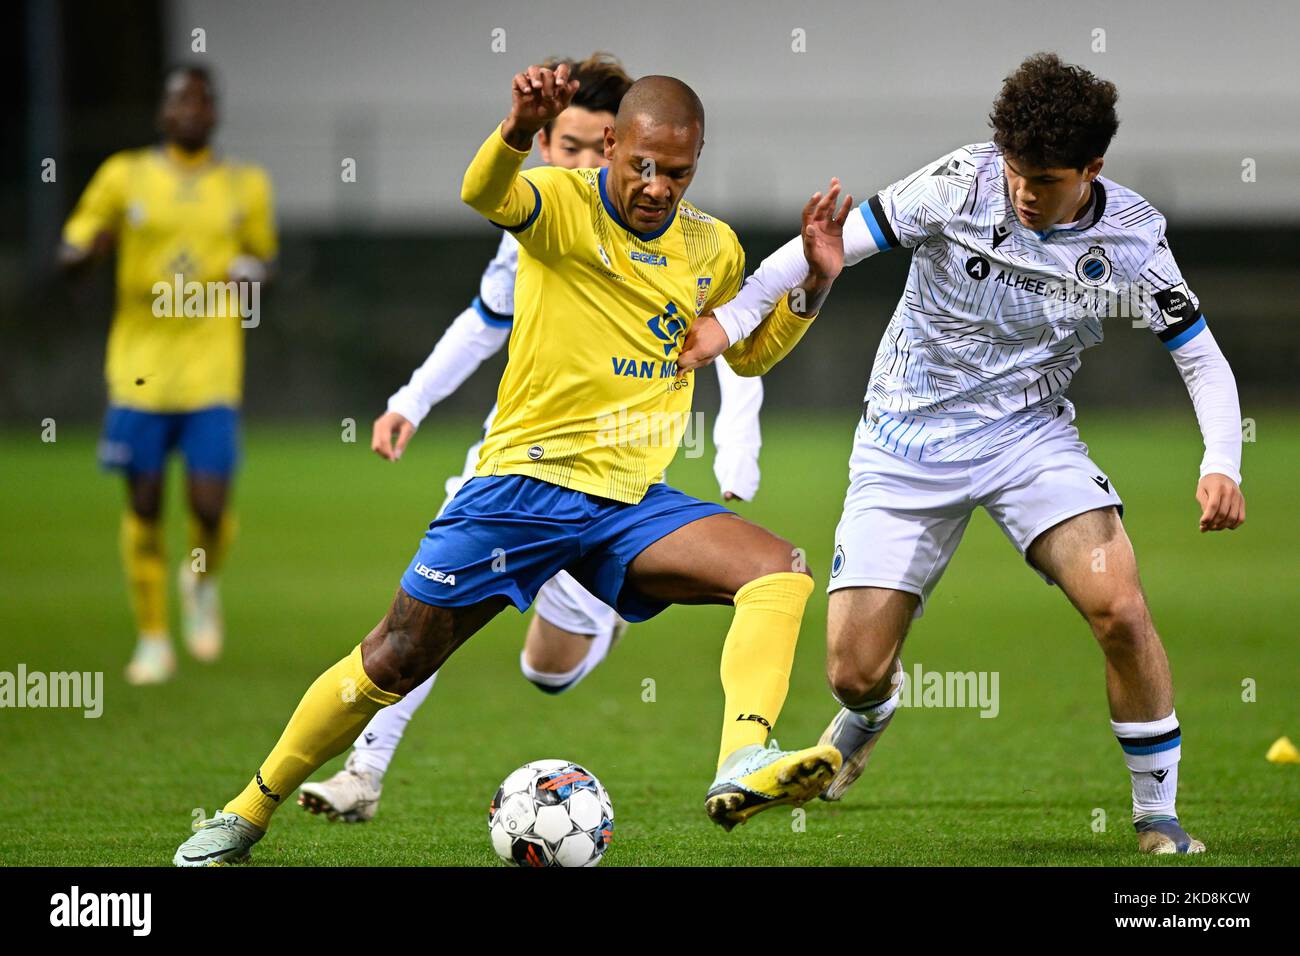 Beveren's Luiz Everton and Club NXT's Kyriani Sabbe fight for the ball during a soccer match between SK Beveren and Club NXT, Saturday 05 November 2022 in Beveren-Waas, on day 12 of the 2022-2023 'Challenger Pro League' 1B second division of the Belgian championship. BELGA PHOTO FILIP LANSZWEERT Stock Photo